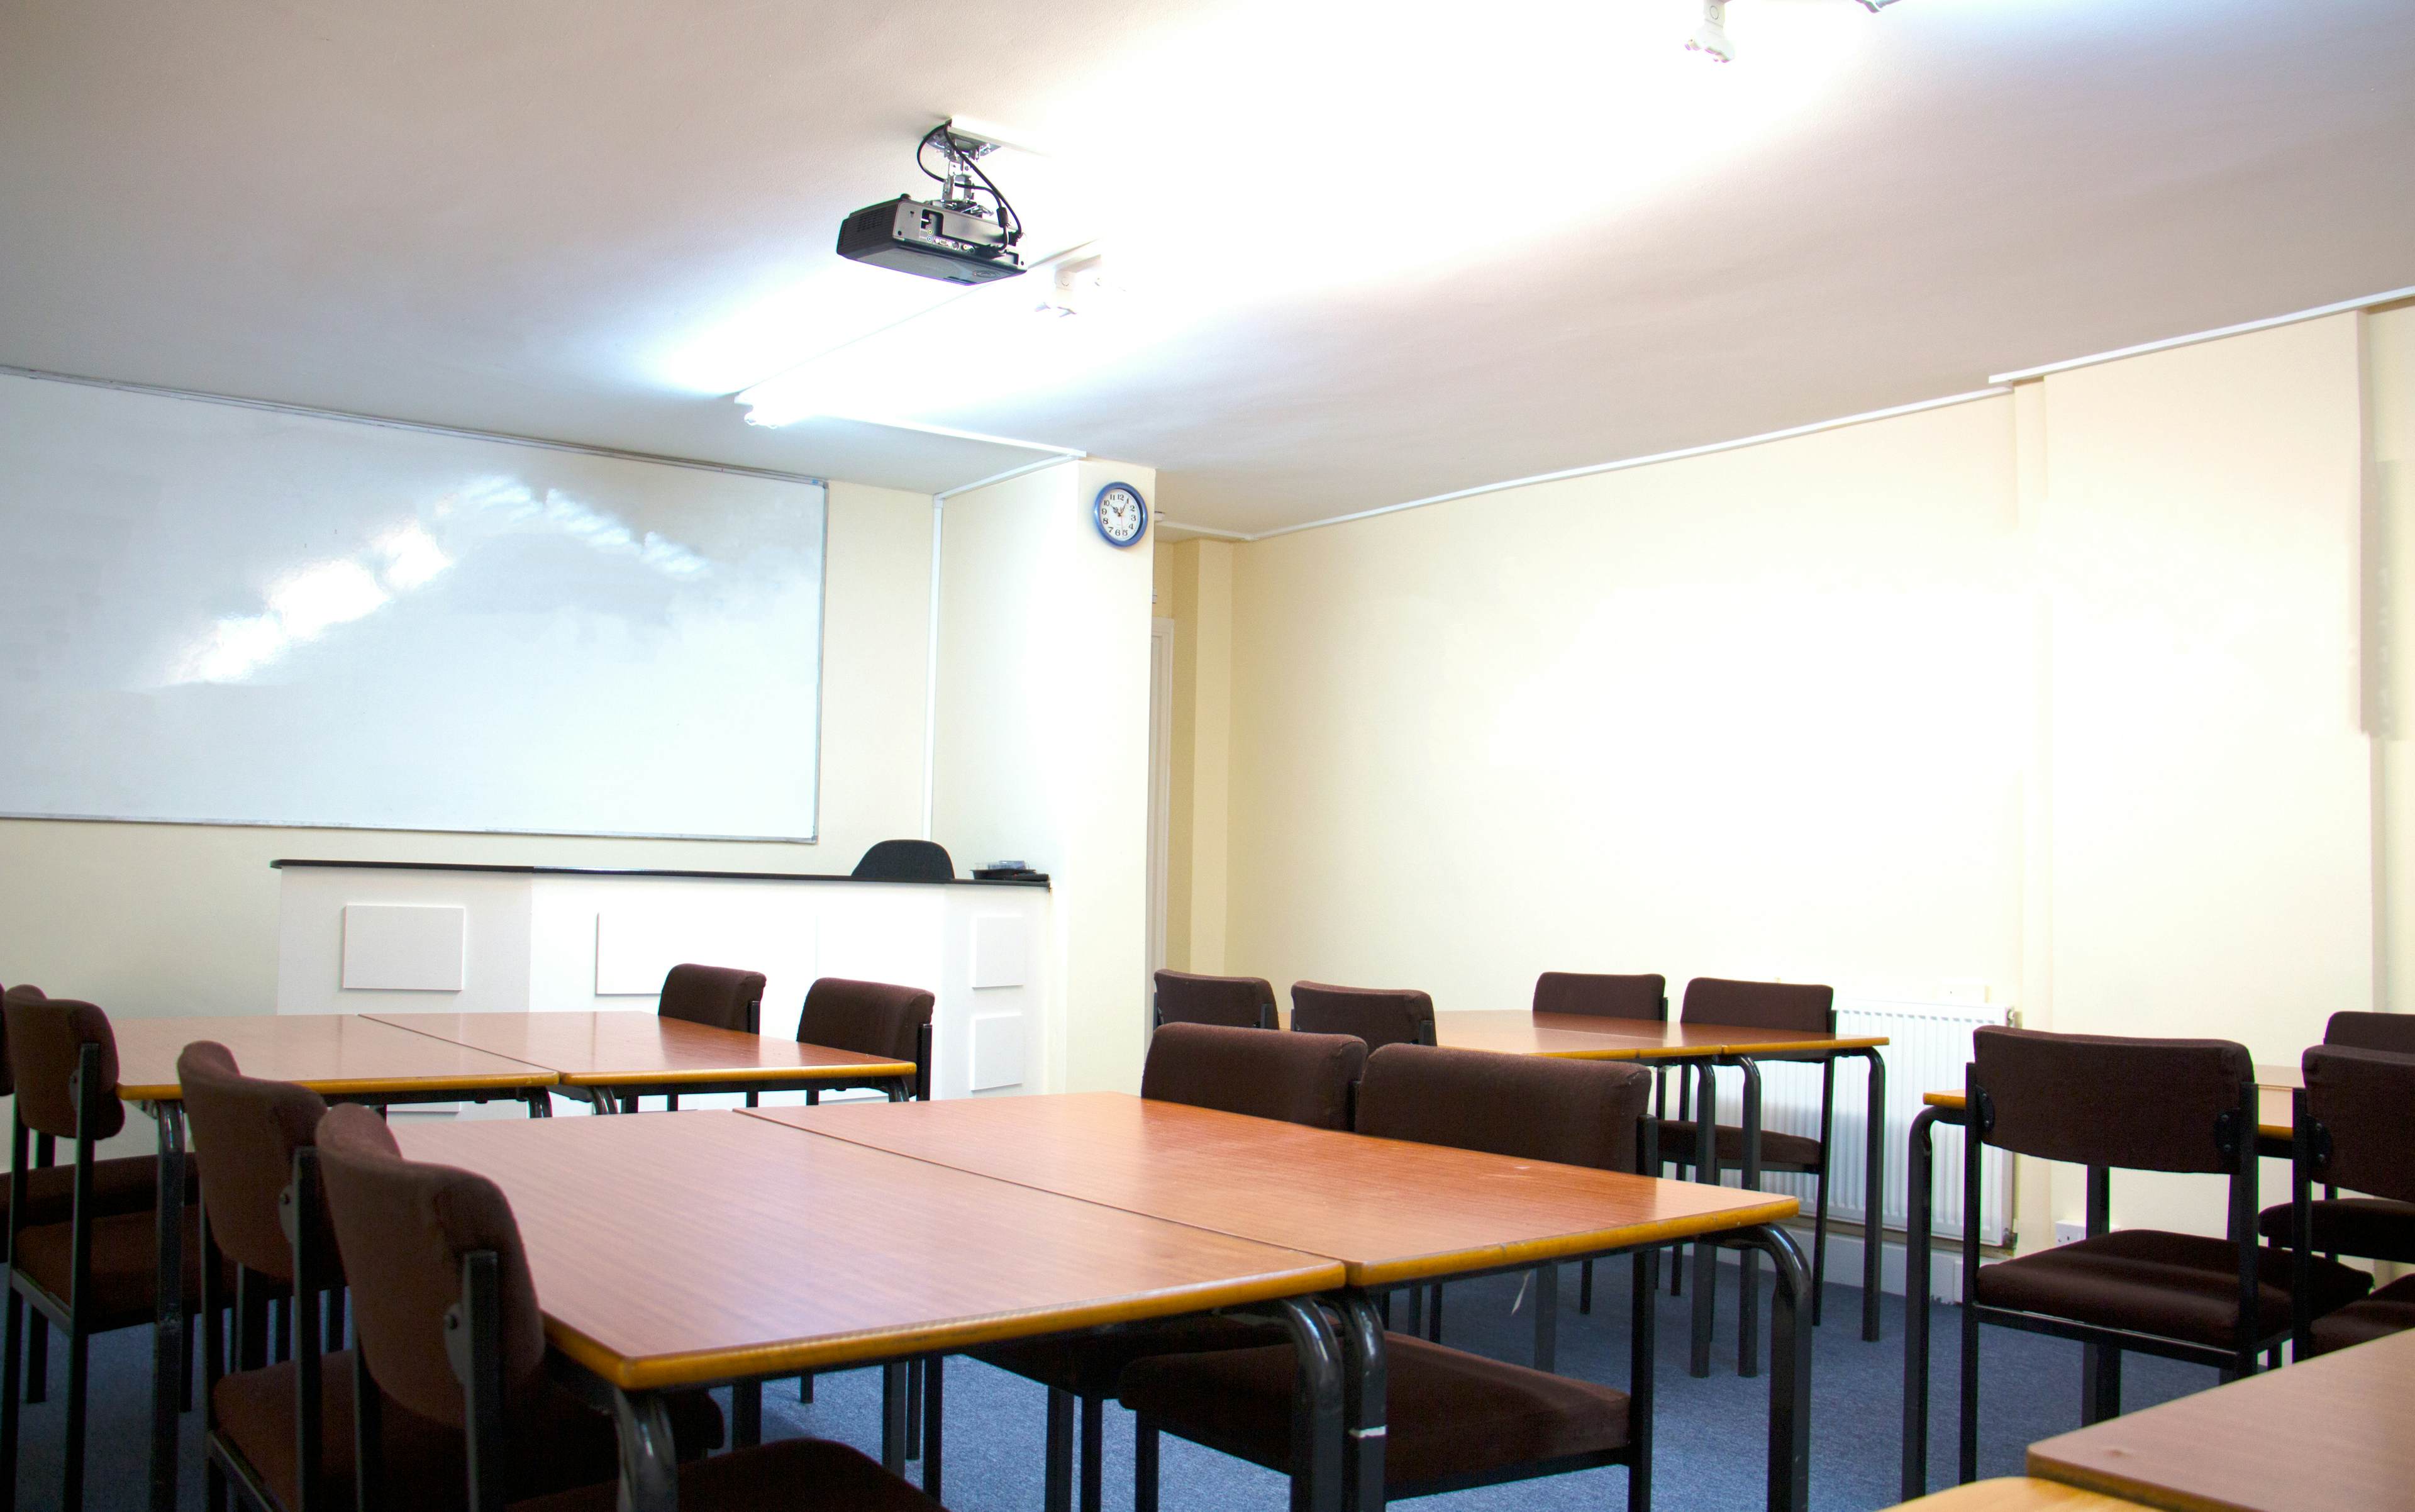 My Meeting Space - North London College - Meeting Room/Classroom 106 image 1